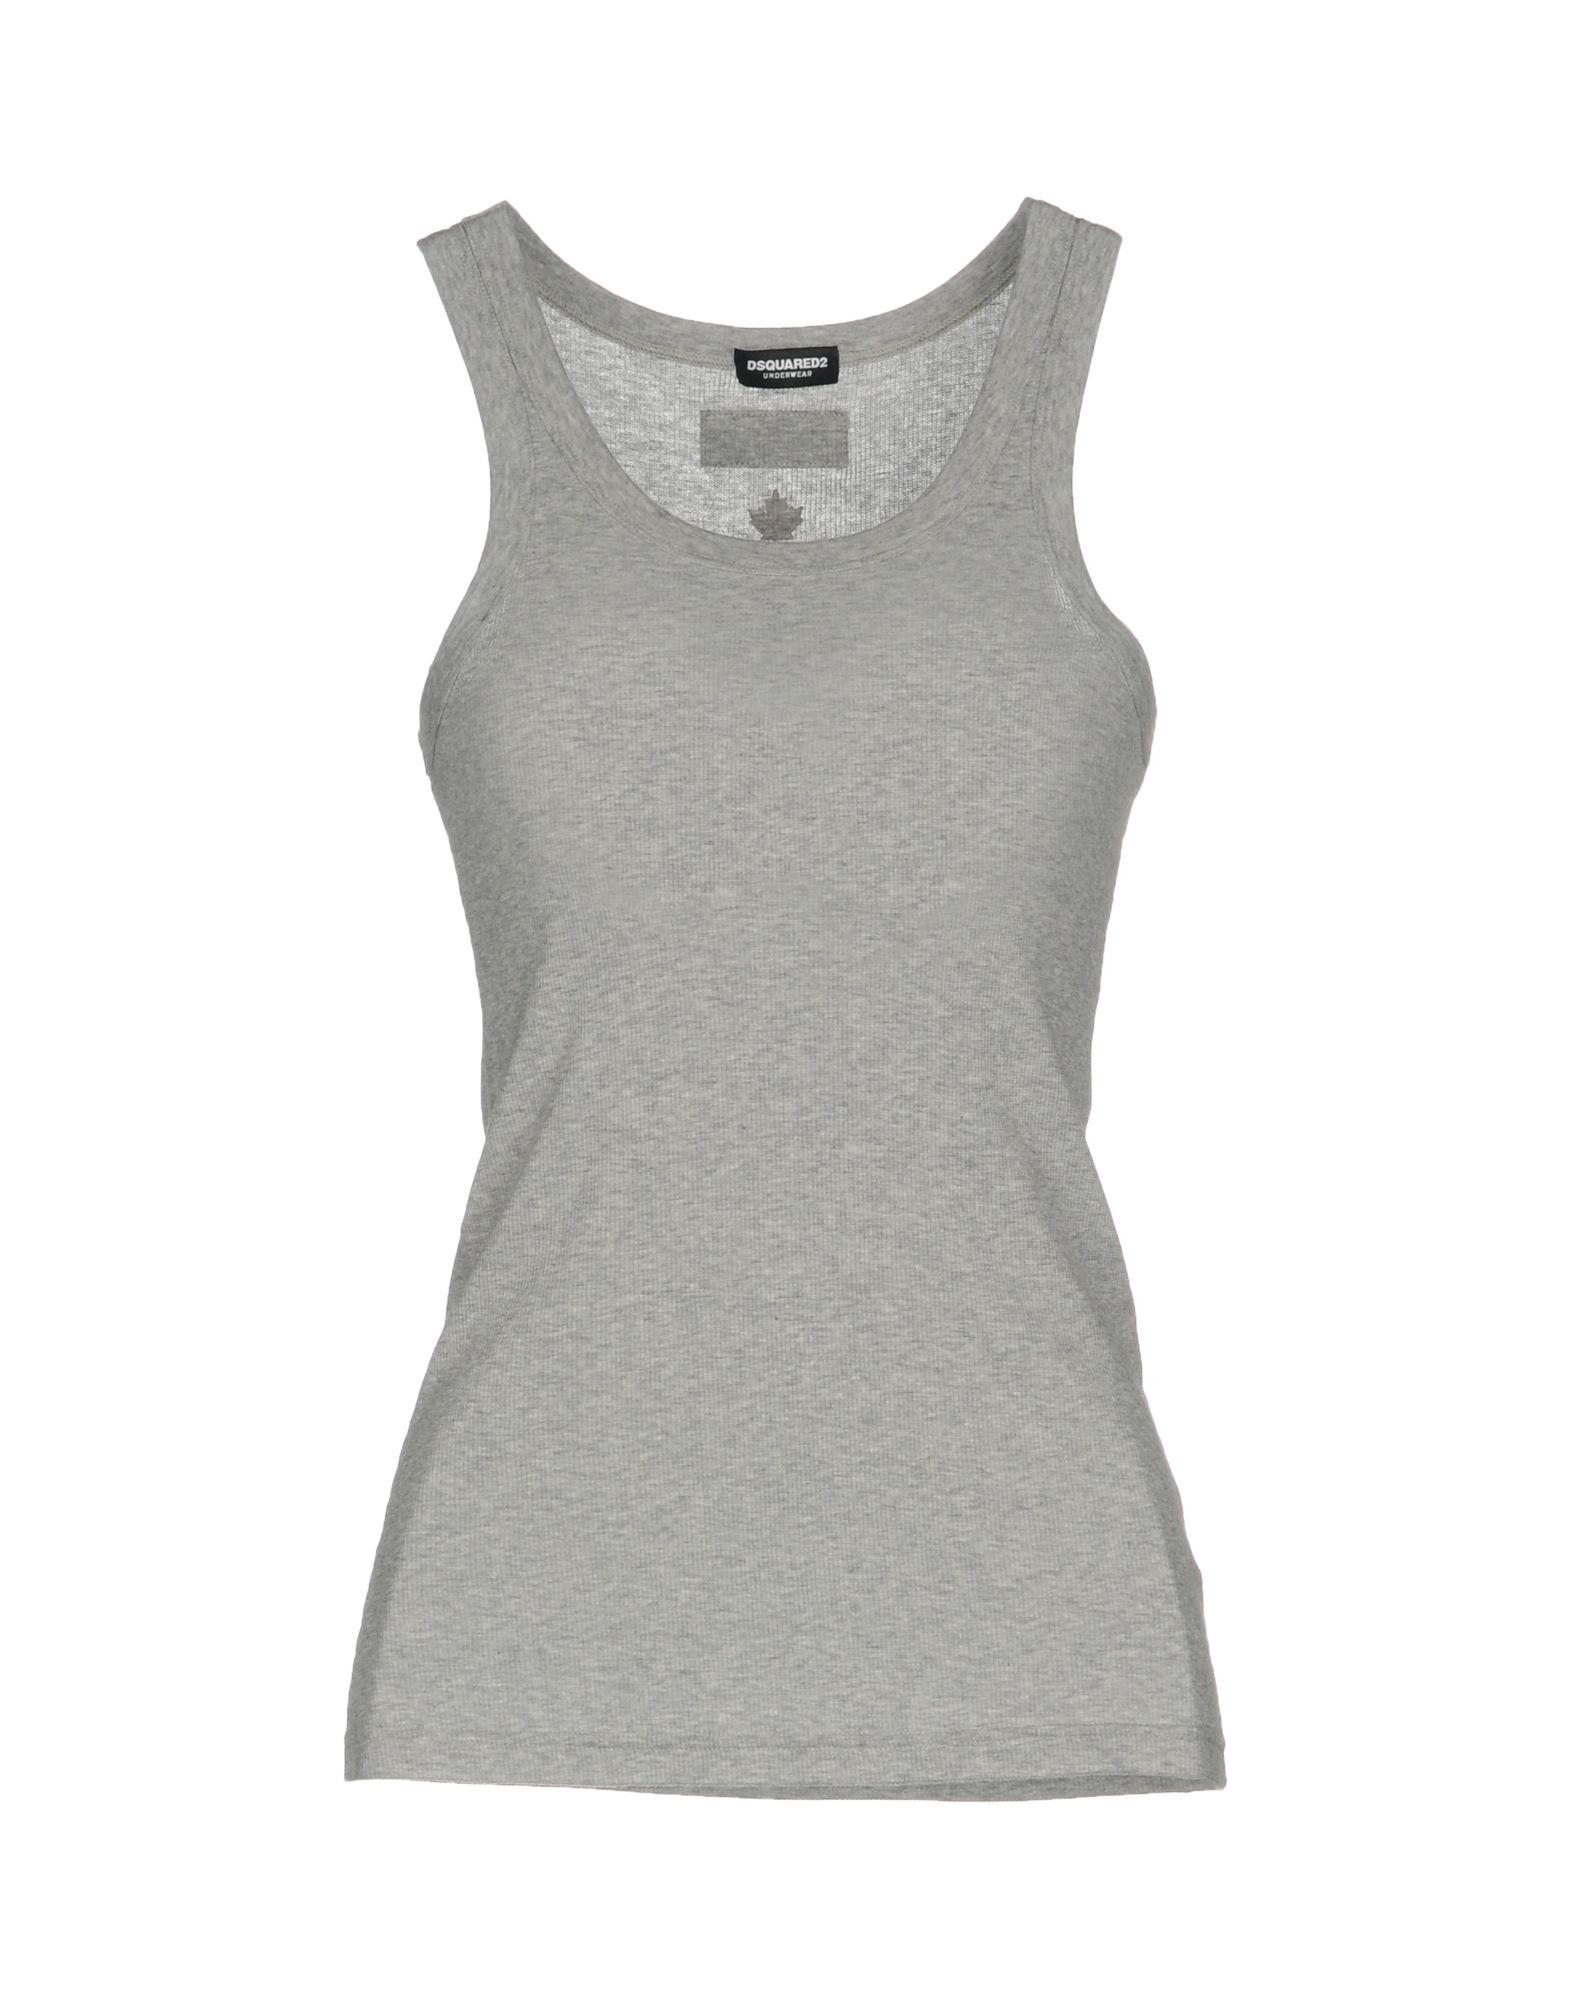 DSquared² Cotton Sleeveless Undershirt in Grey (Gray) - Lyst